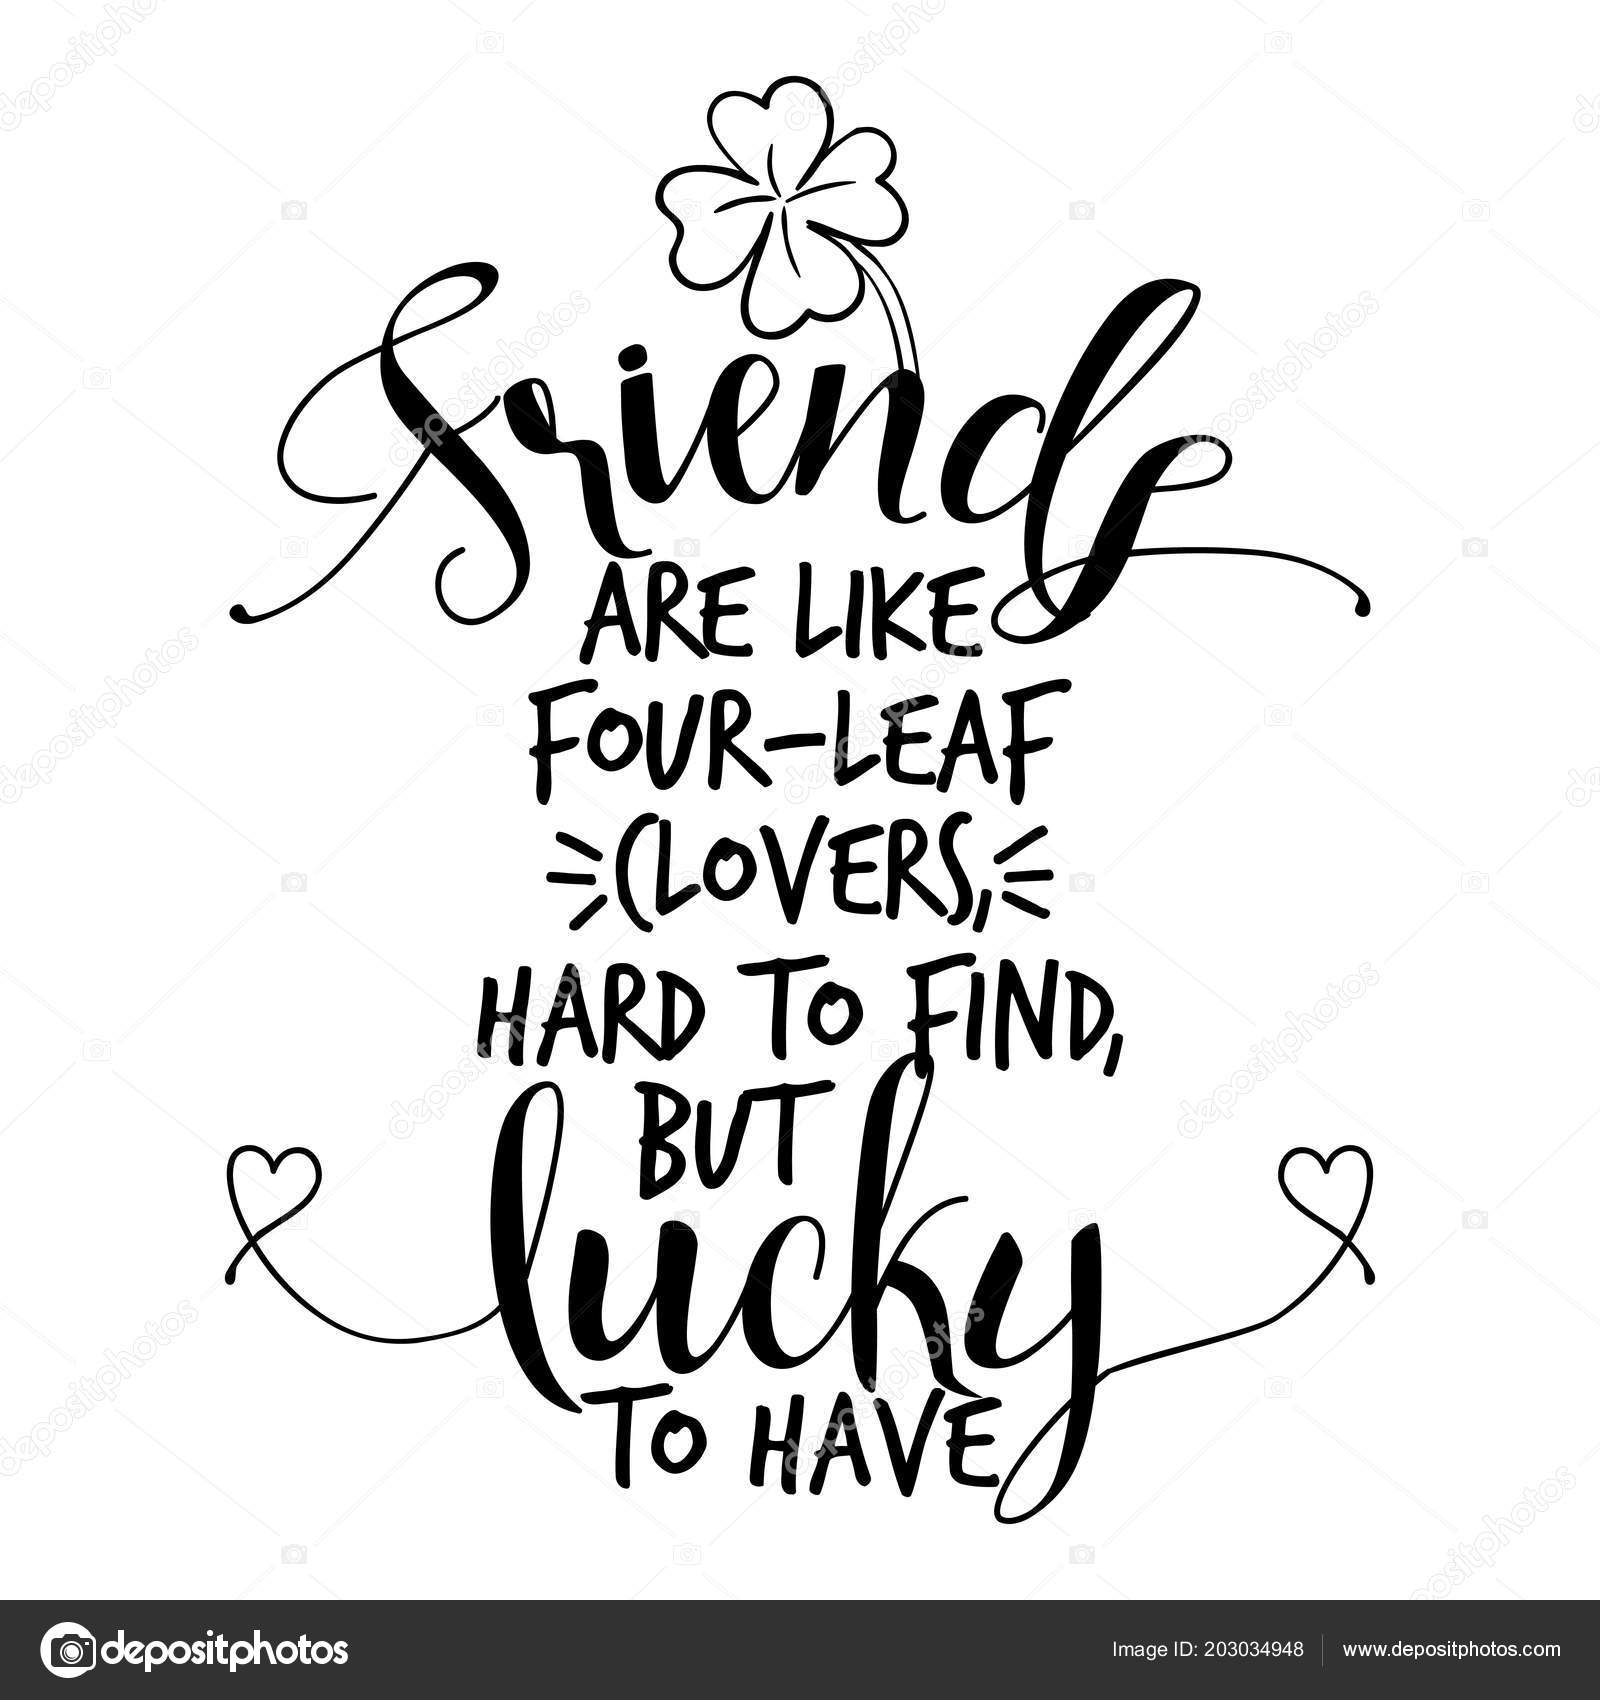 DIYthinker Best Friend is Like Four Leaf Clover Quote Desktop Photo Frame Picture Display Decoration Art Painting 